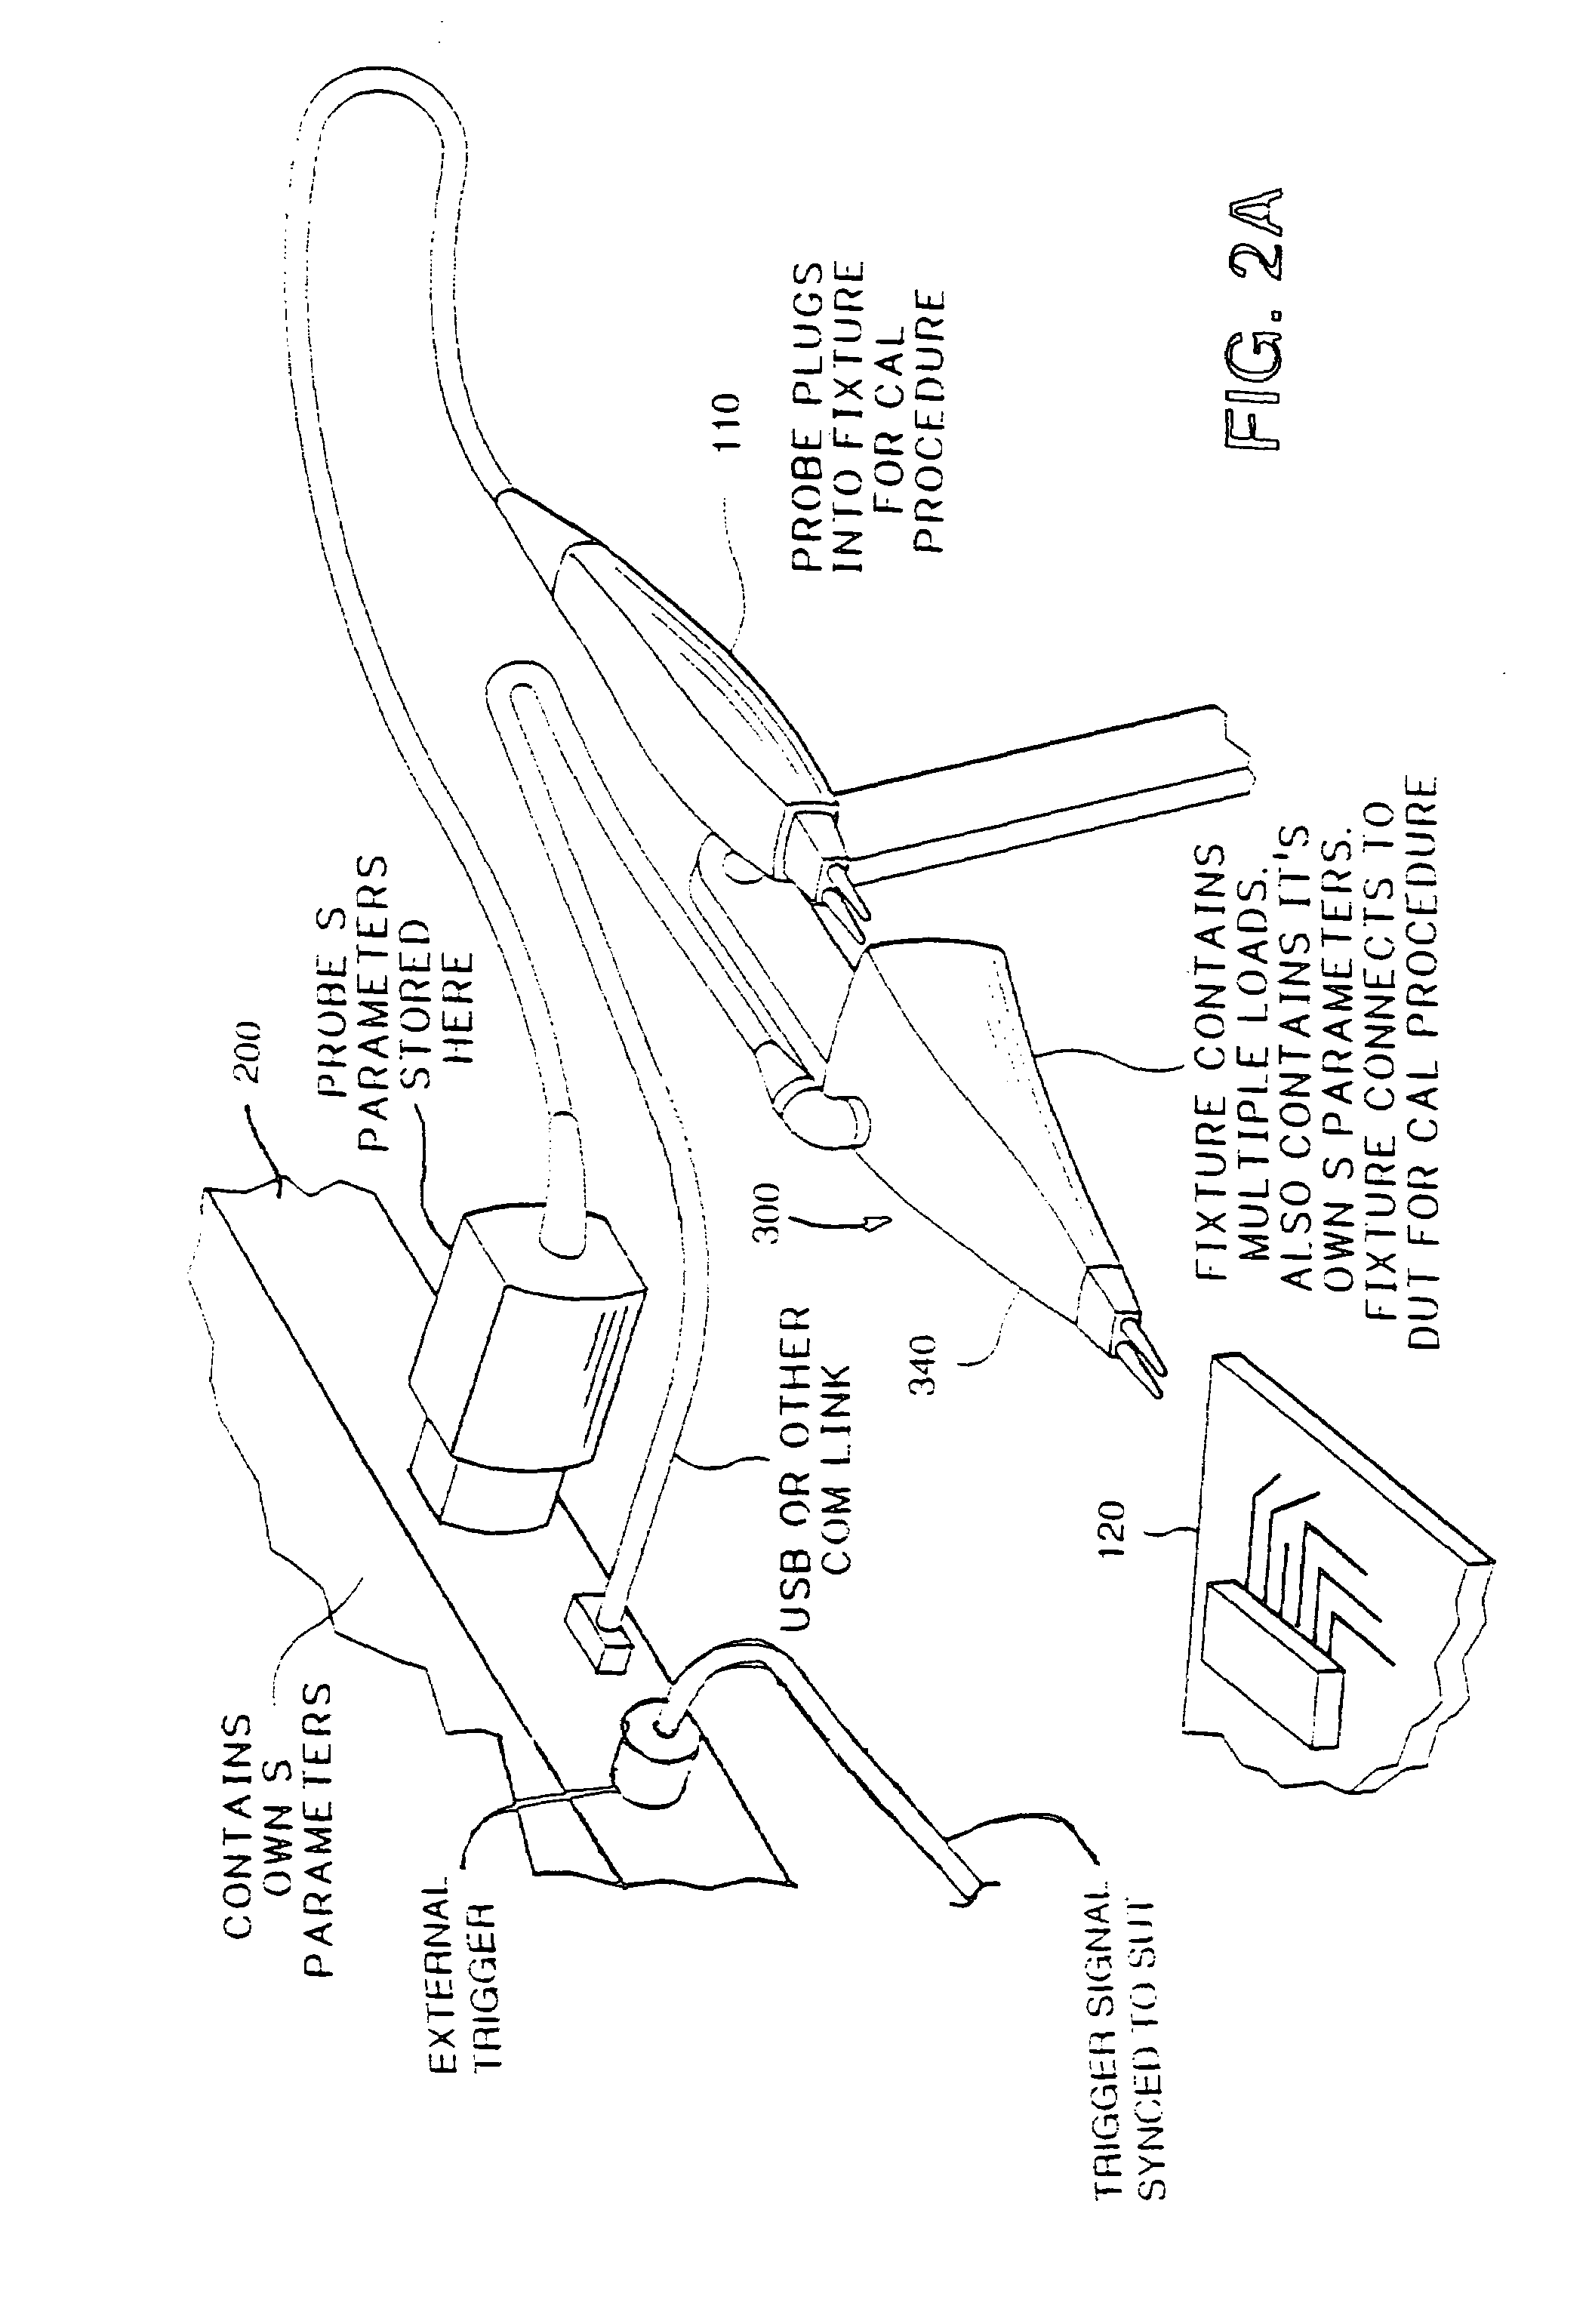 Signal analysis system and calibration method for multiple signal probes